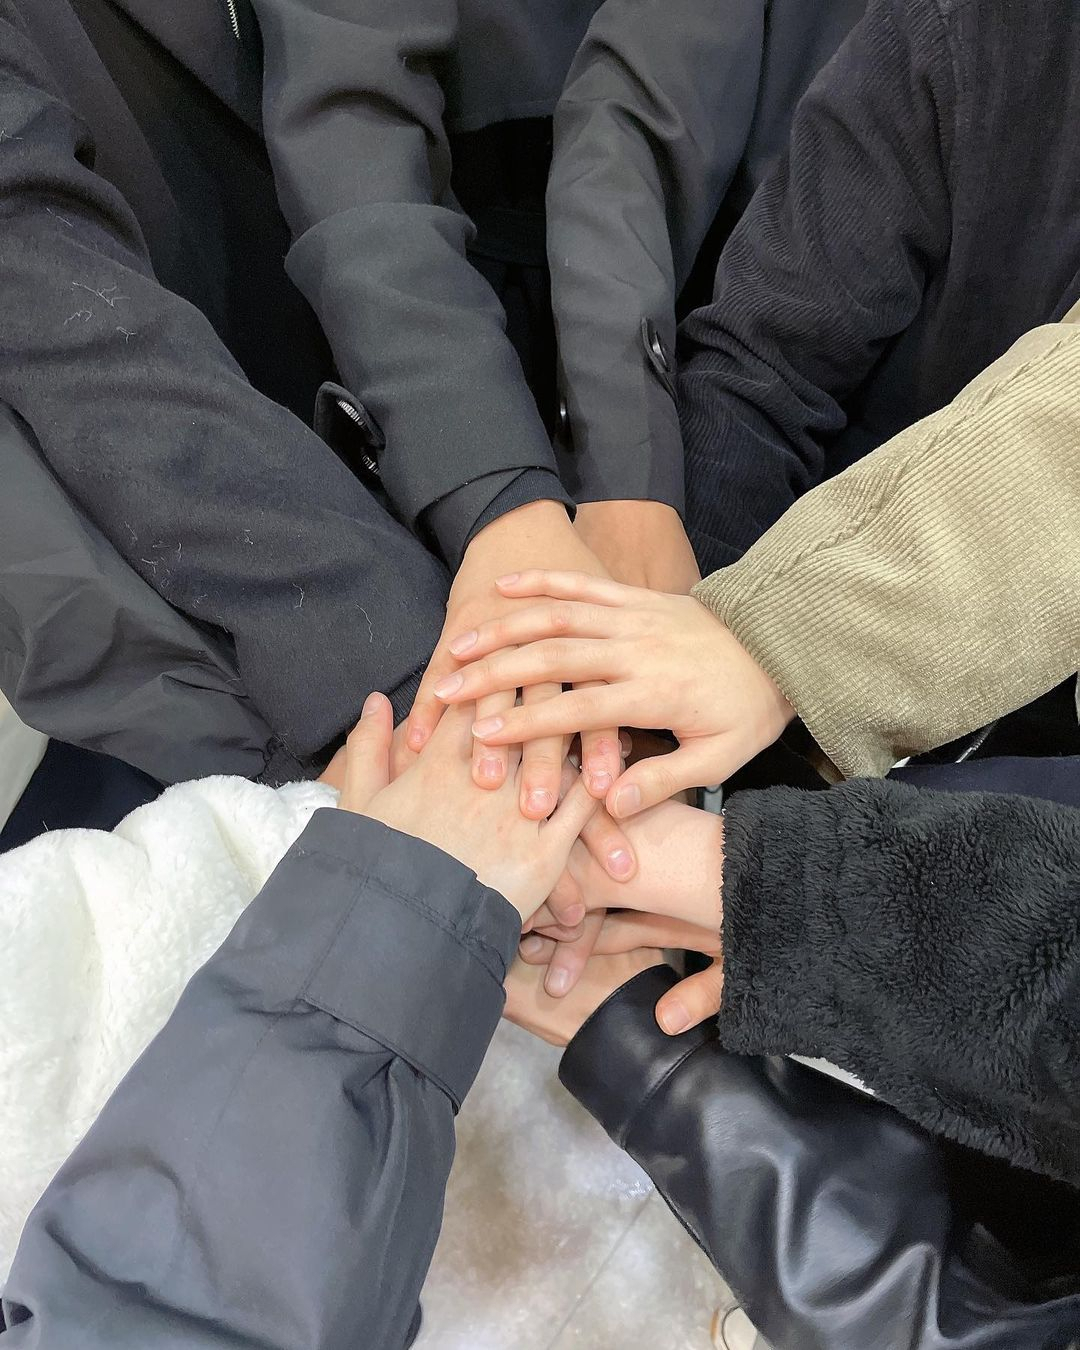 This image posted on Omega X's Instagram on Nov. 6 shows the hands of 11 members piled together. (Instagram @omega_x__for_x)